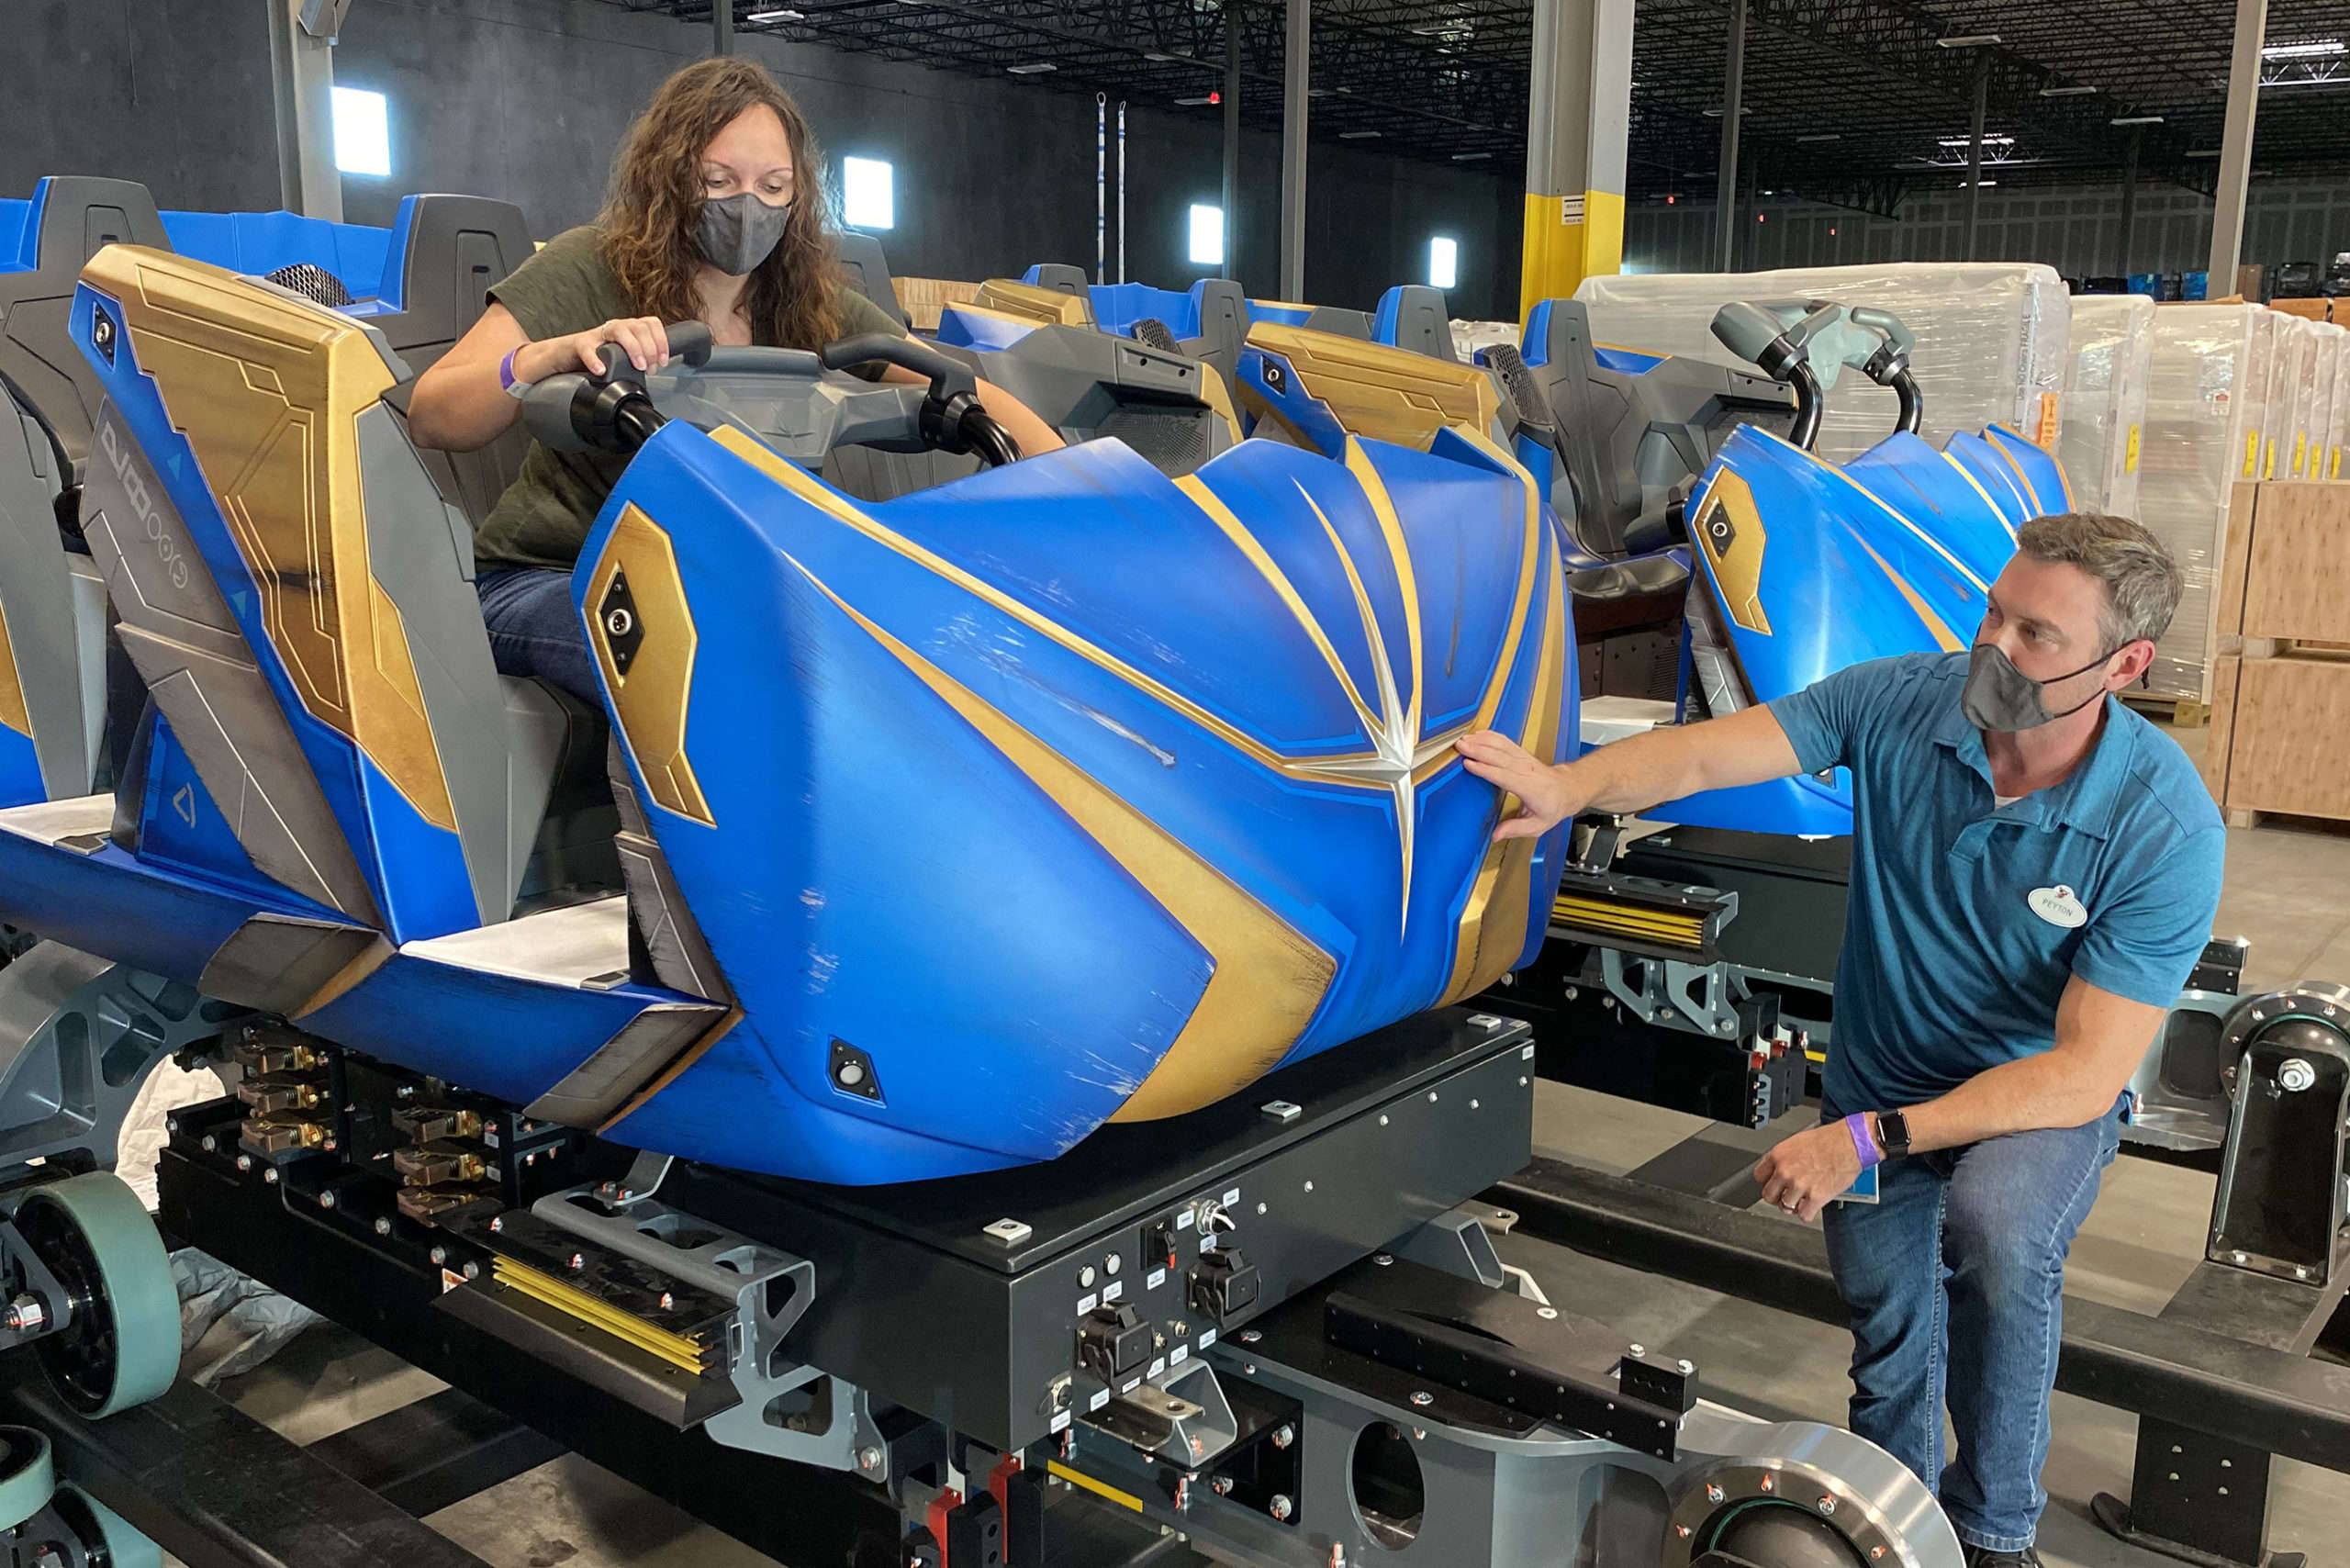 Two people working on the colorful roller coaster ride vehicle that will be used for the Guardians of the Galaxy: Cosmic Rewind ride